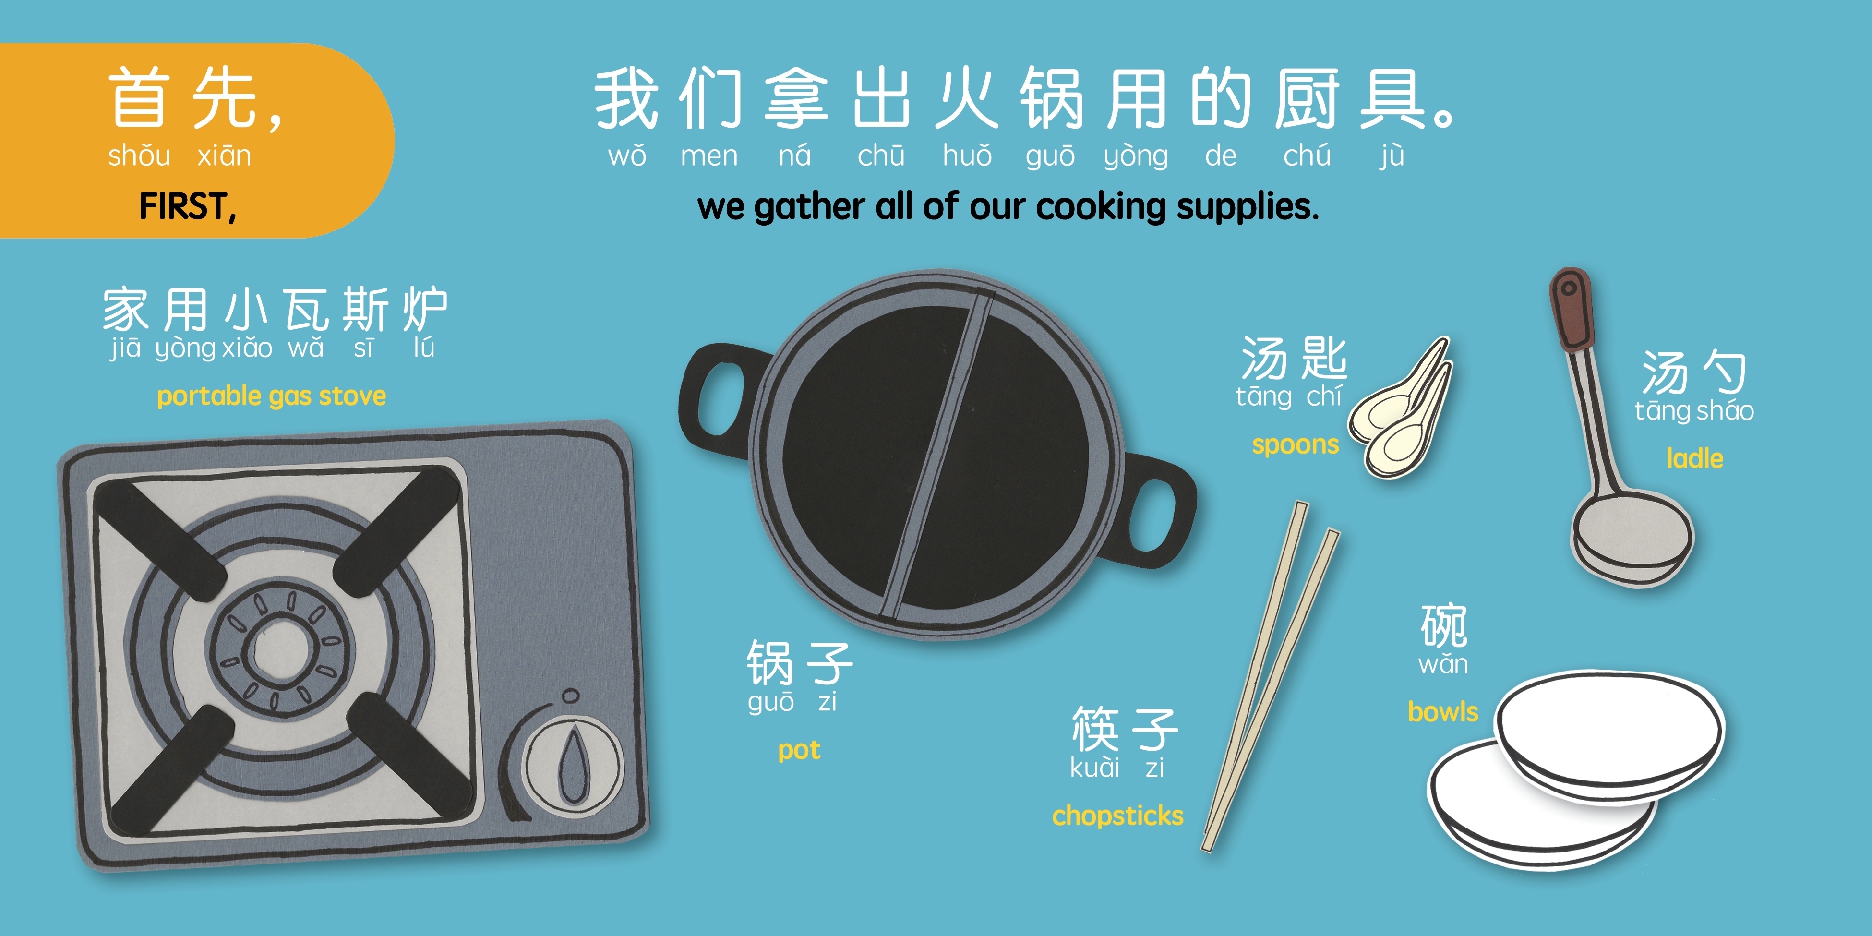 It's Time for Hot Pot - Simplified